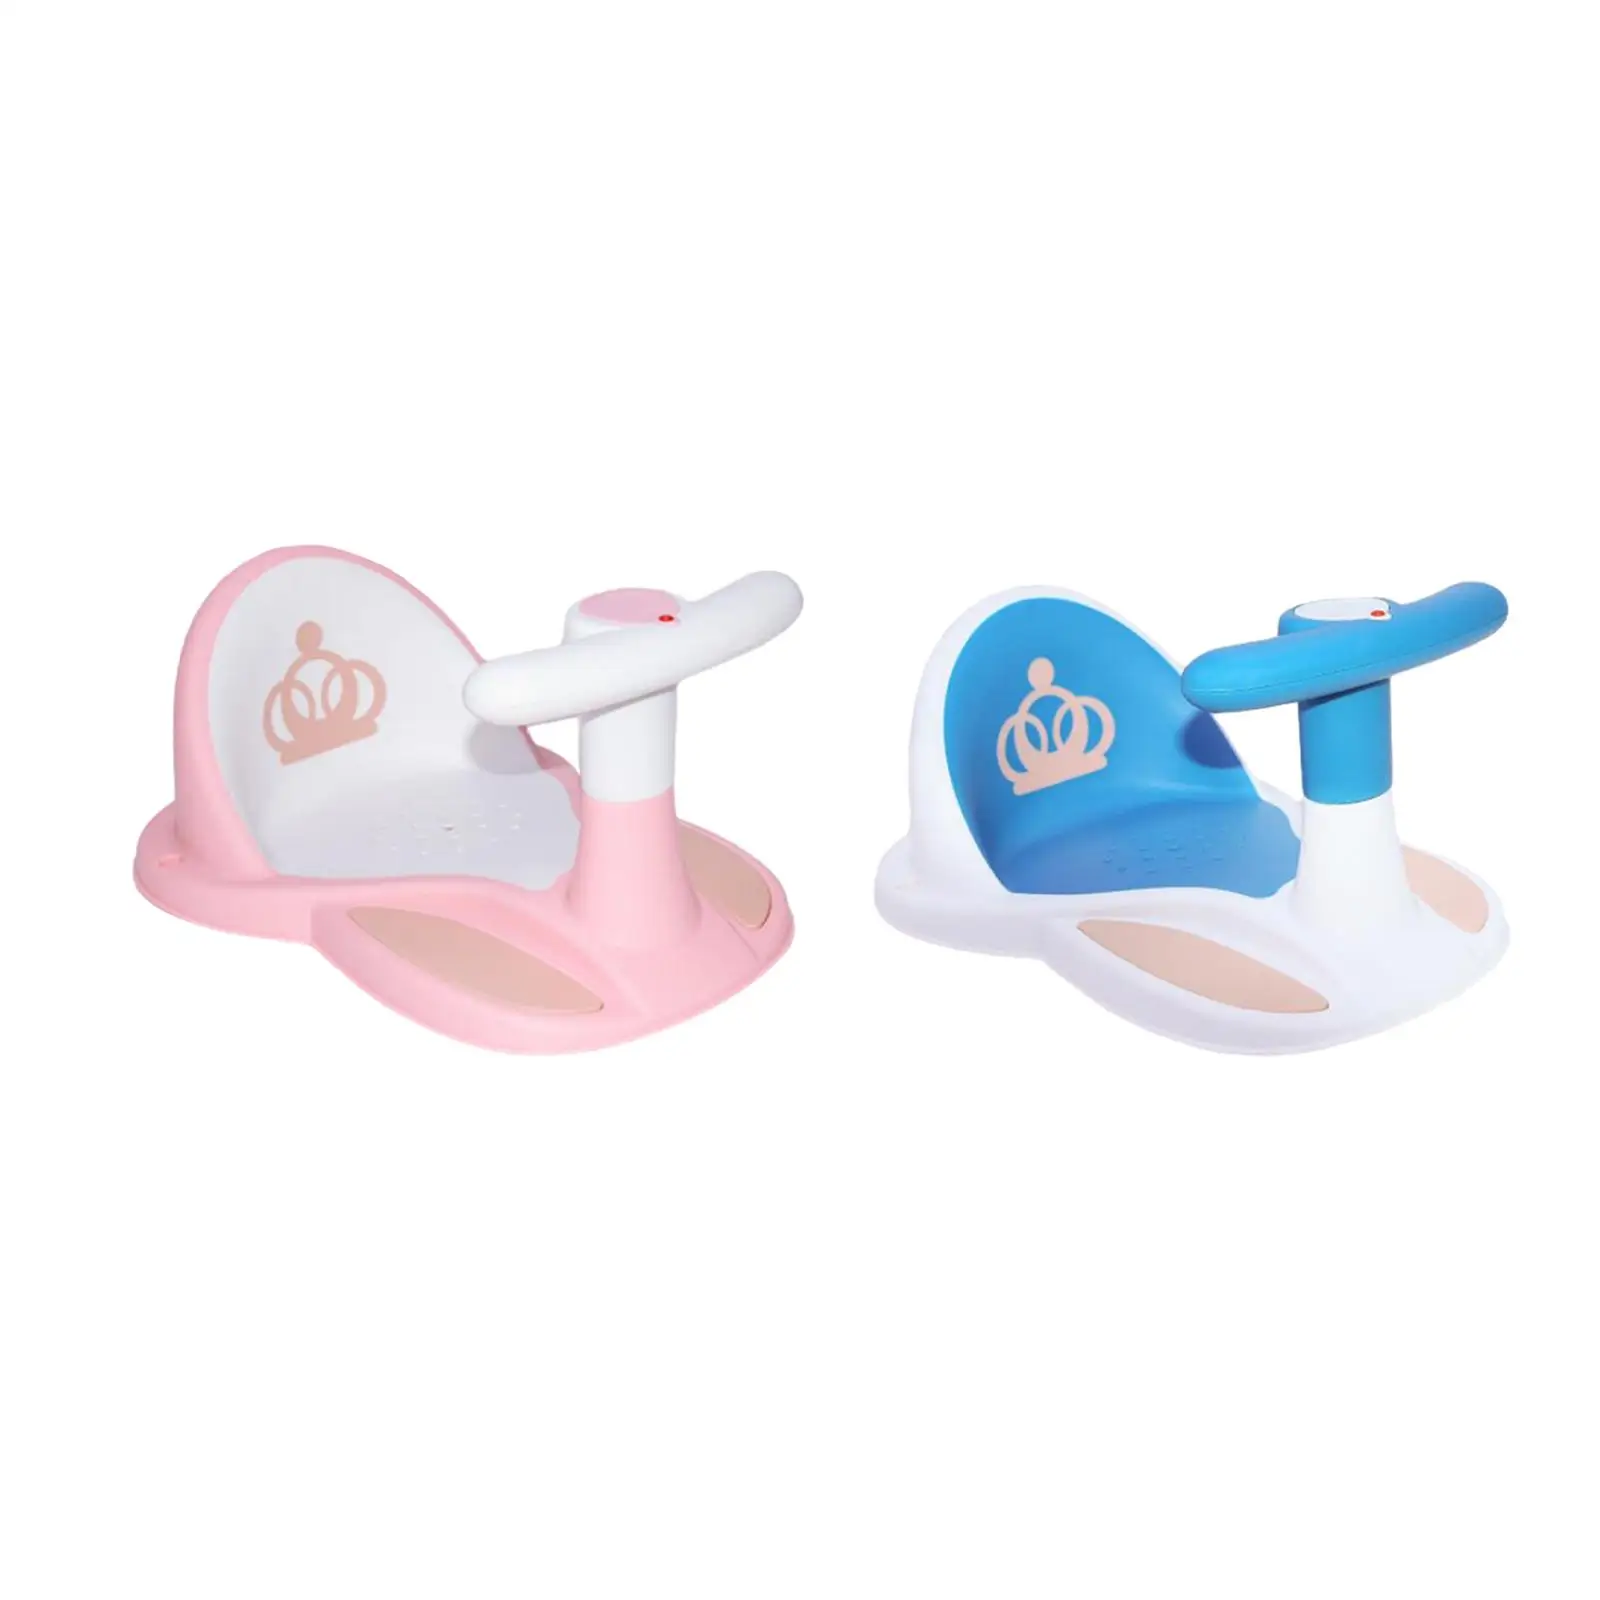 

Baby Bathtub Seat Safety Portable Bath Seat Support Stable Bathing Seat Toddlers Shower Seats for Girls Toddlers Baby Kids Boys